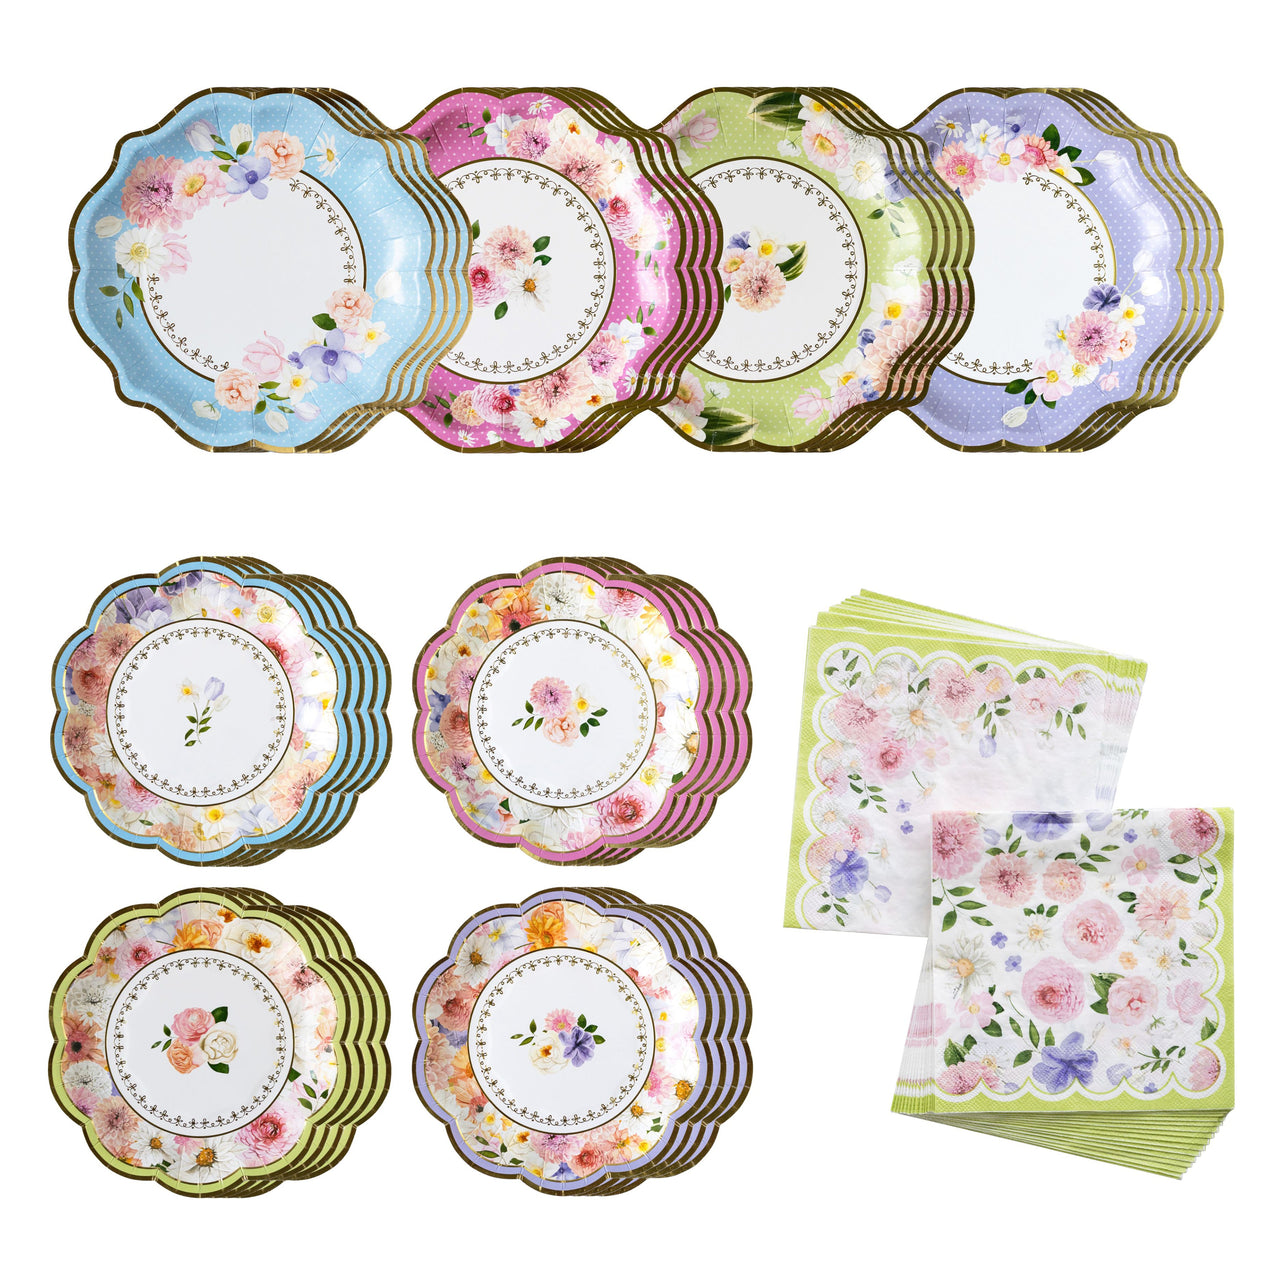 Tea Time Party 62 Piece Party Tableware Set (16 Guests) - Alternate Image 8 | My Wedding Favors